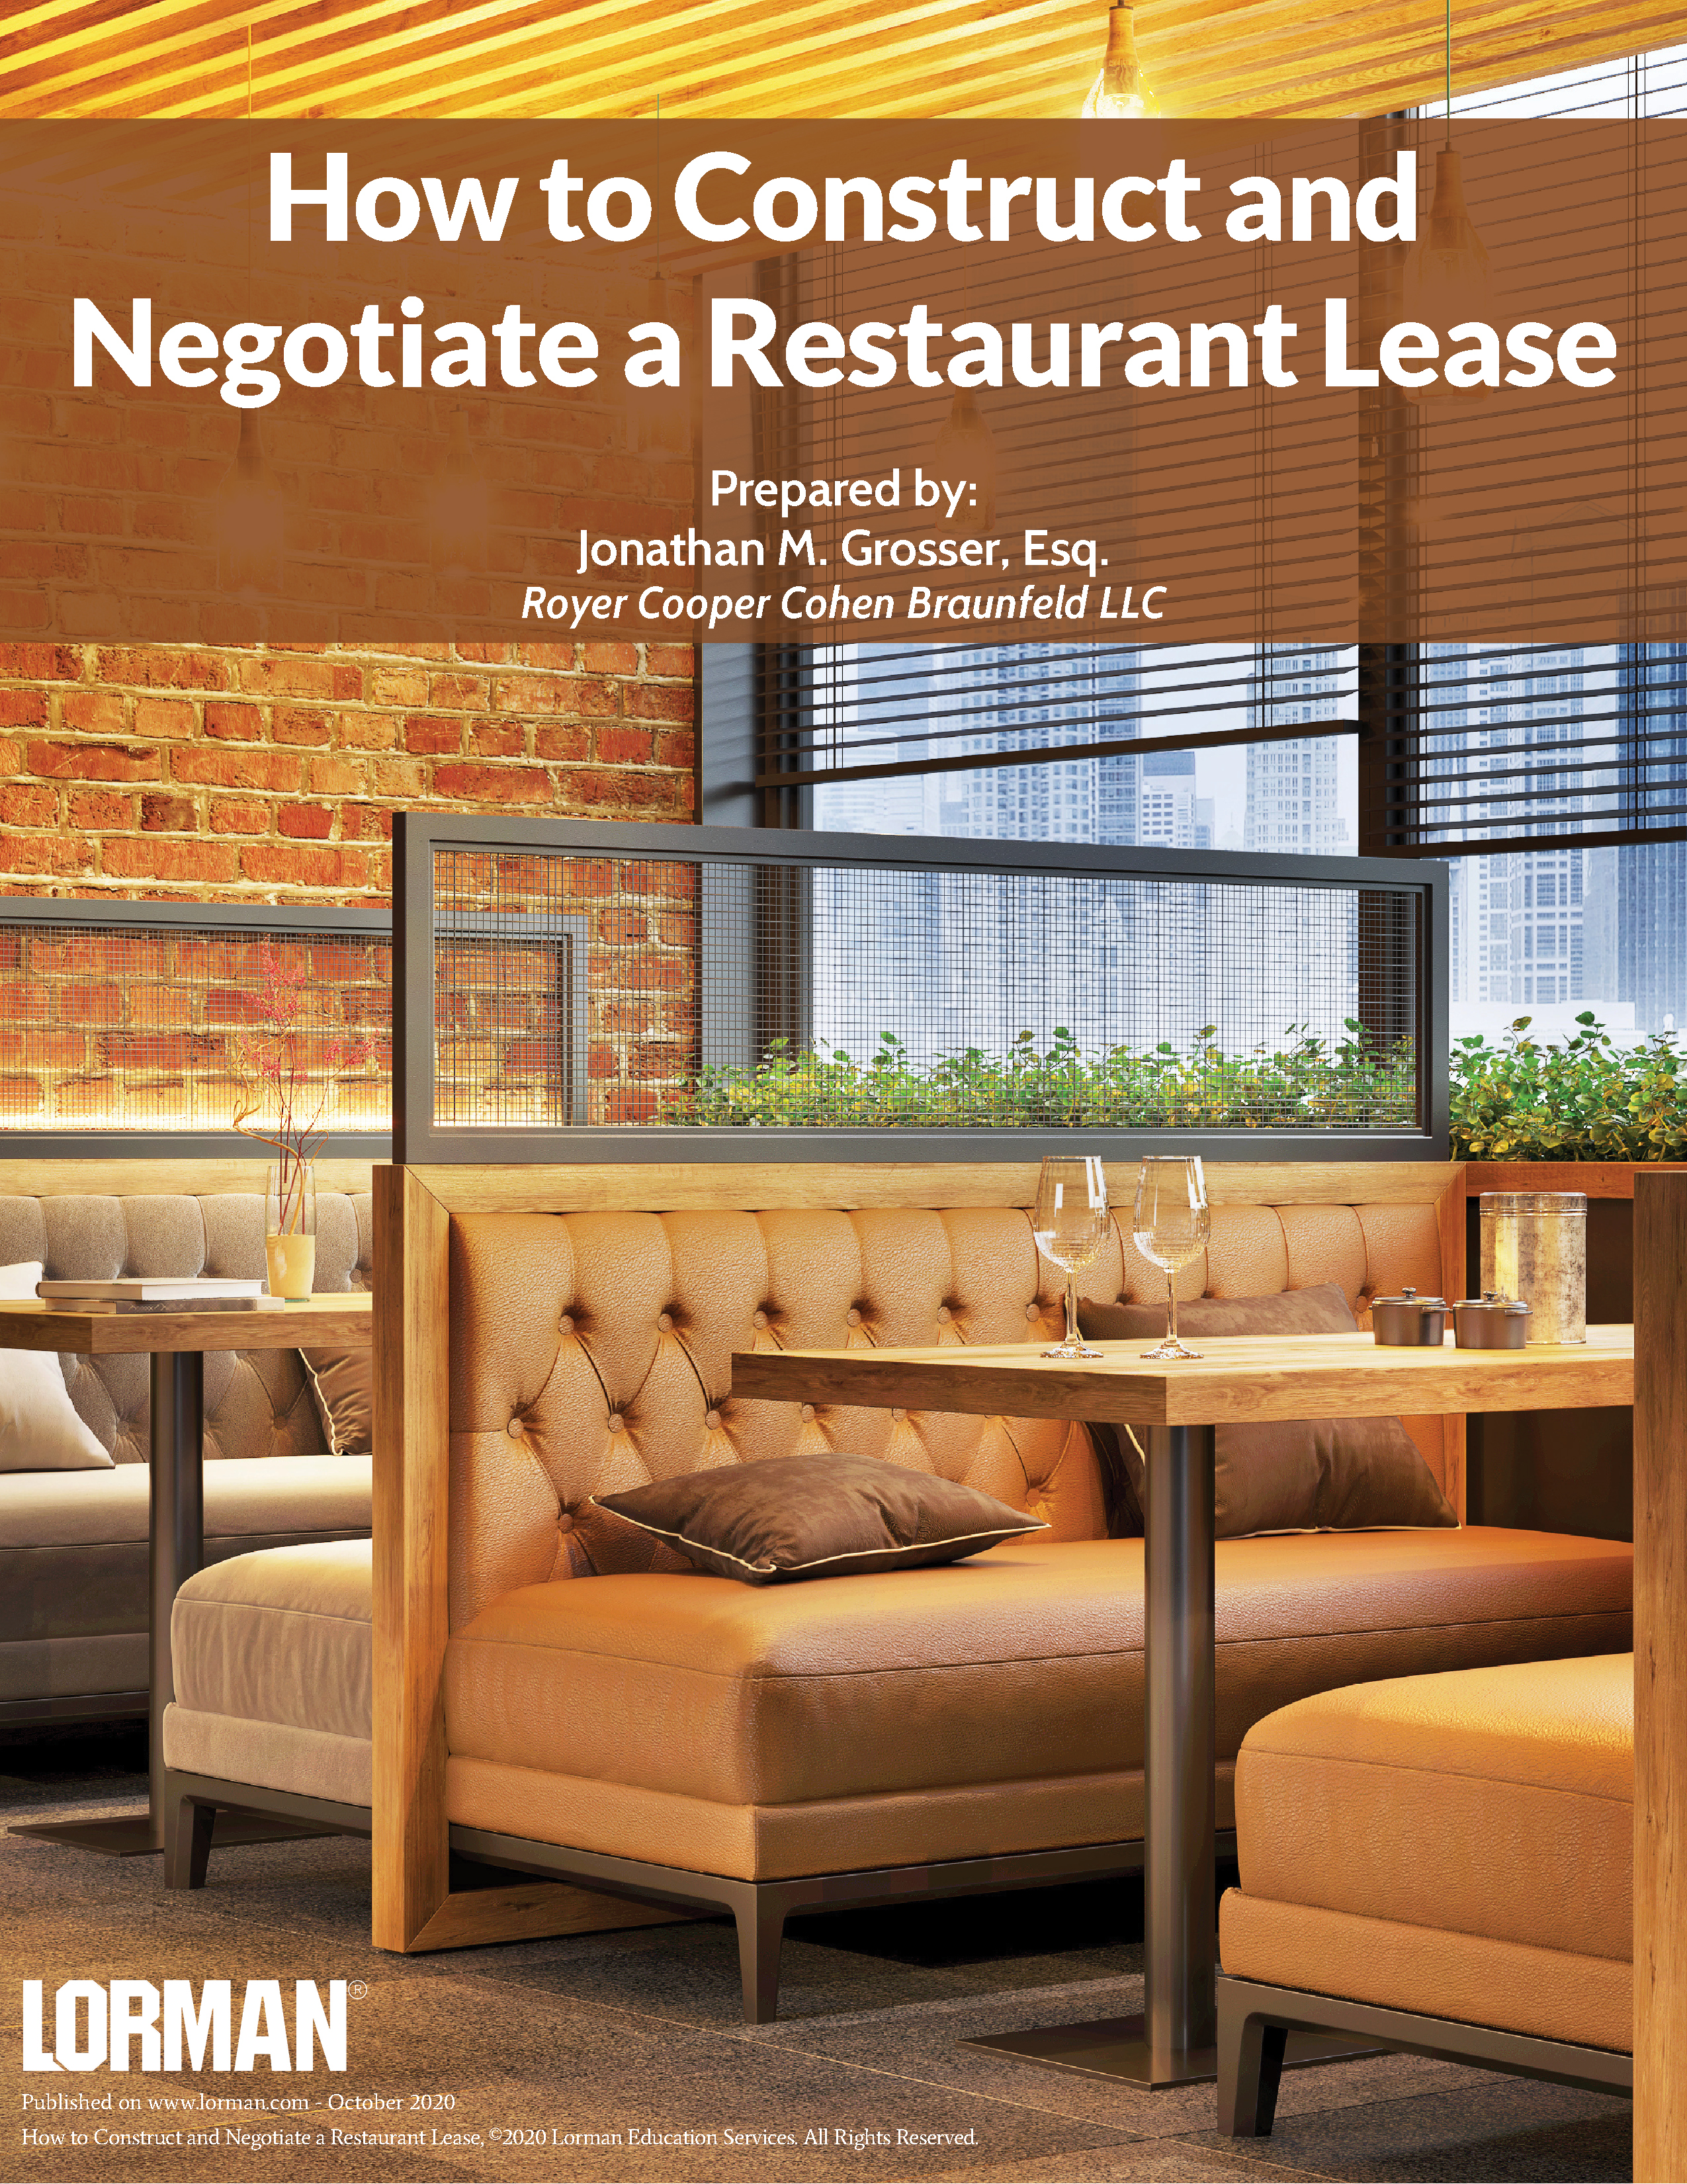 How to Construct and Negotiate a Restaurant Lease